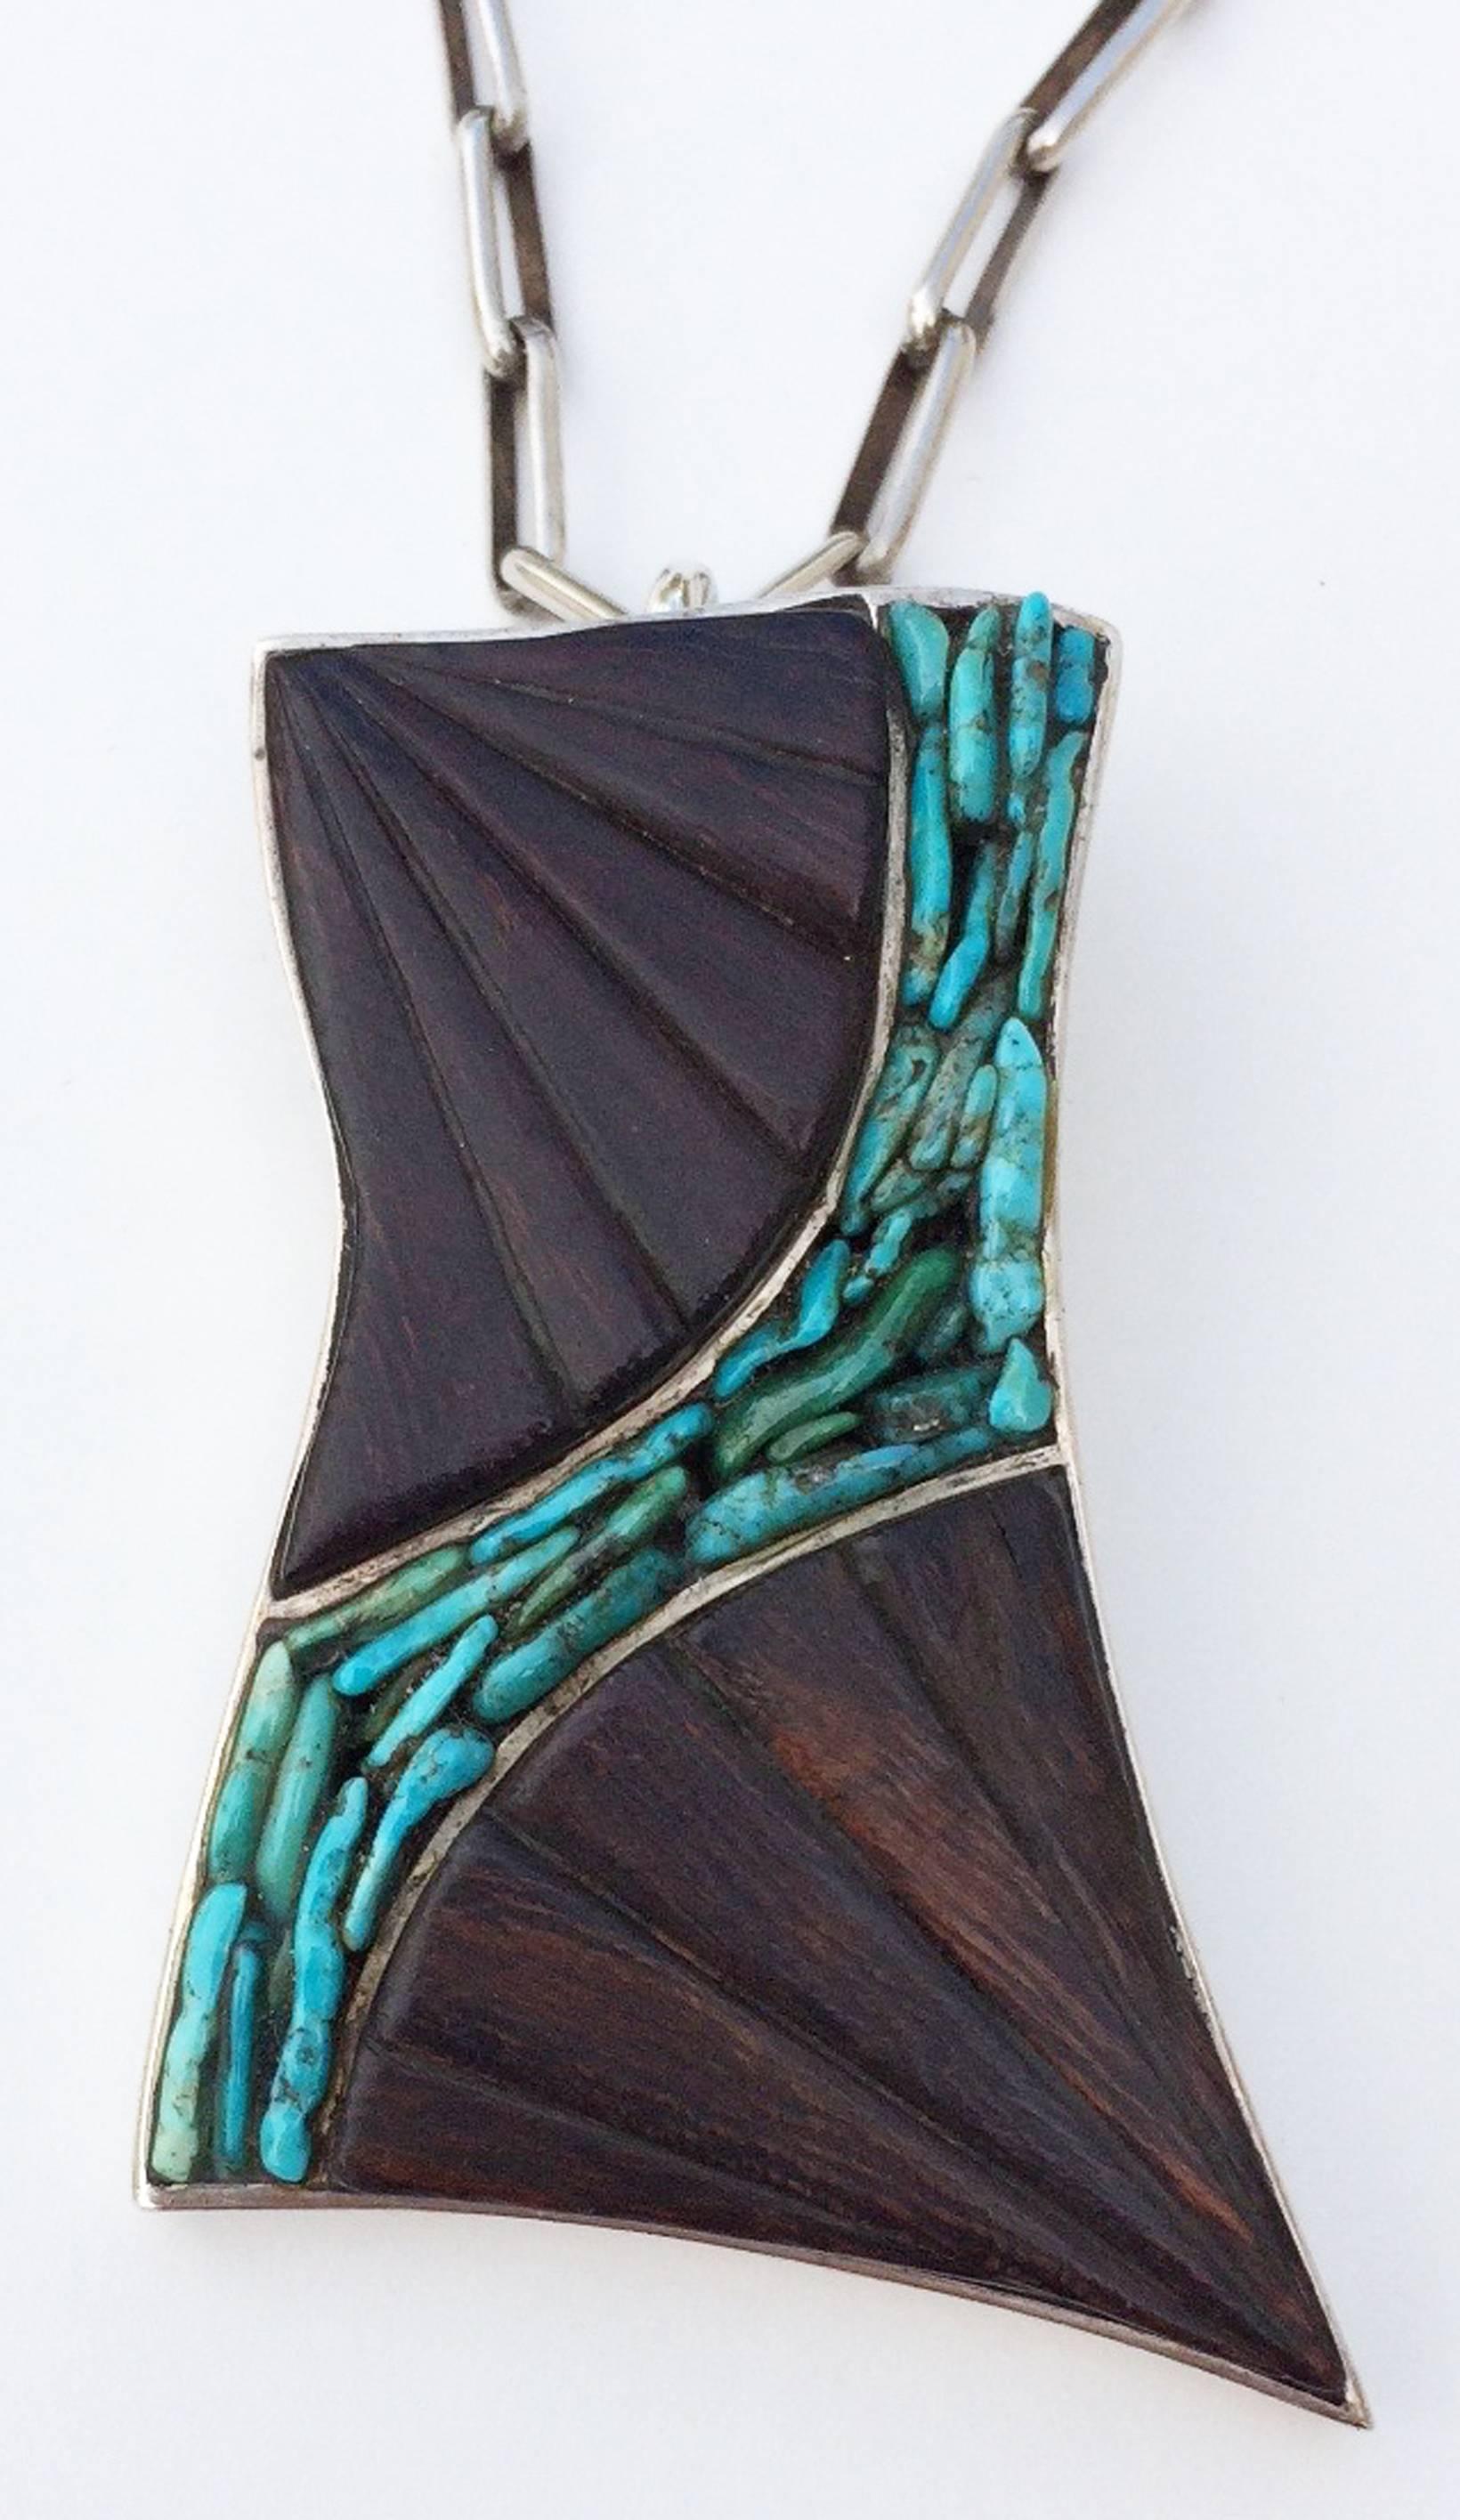 A fine and rare Paul Durkee studio modernist pendant necklace. Signed sterling silver pendant features channel set carved and polished ironwood and turquoise nuggets in a free form organic setting. Original hand constructed 24